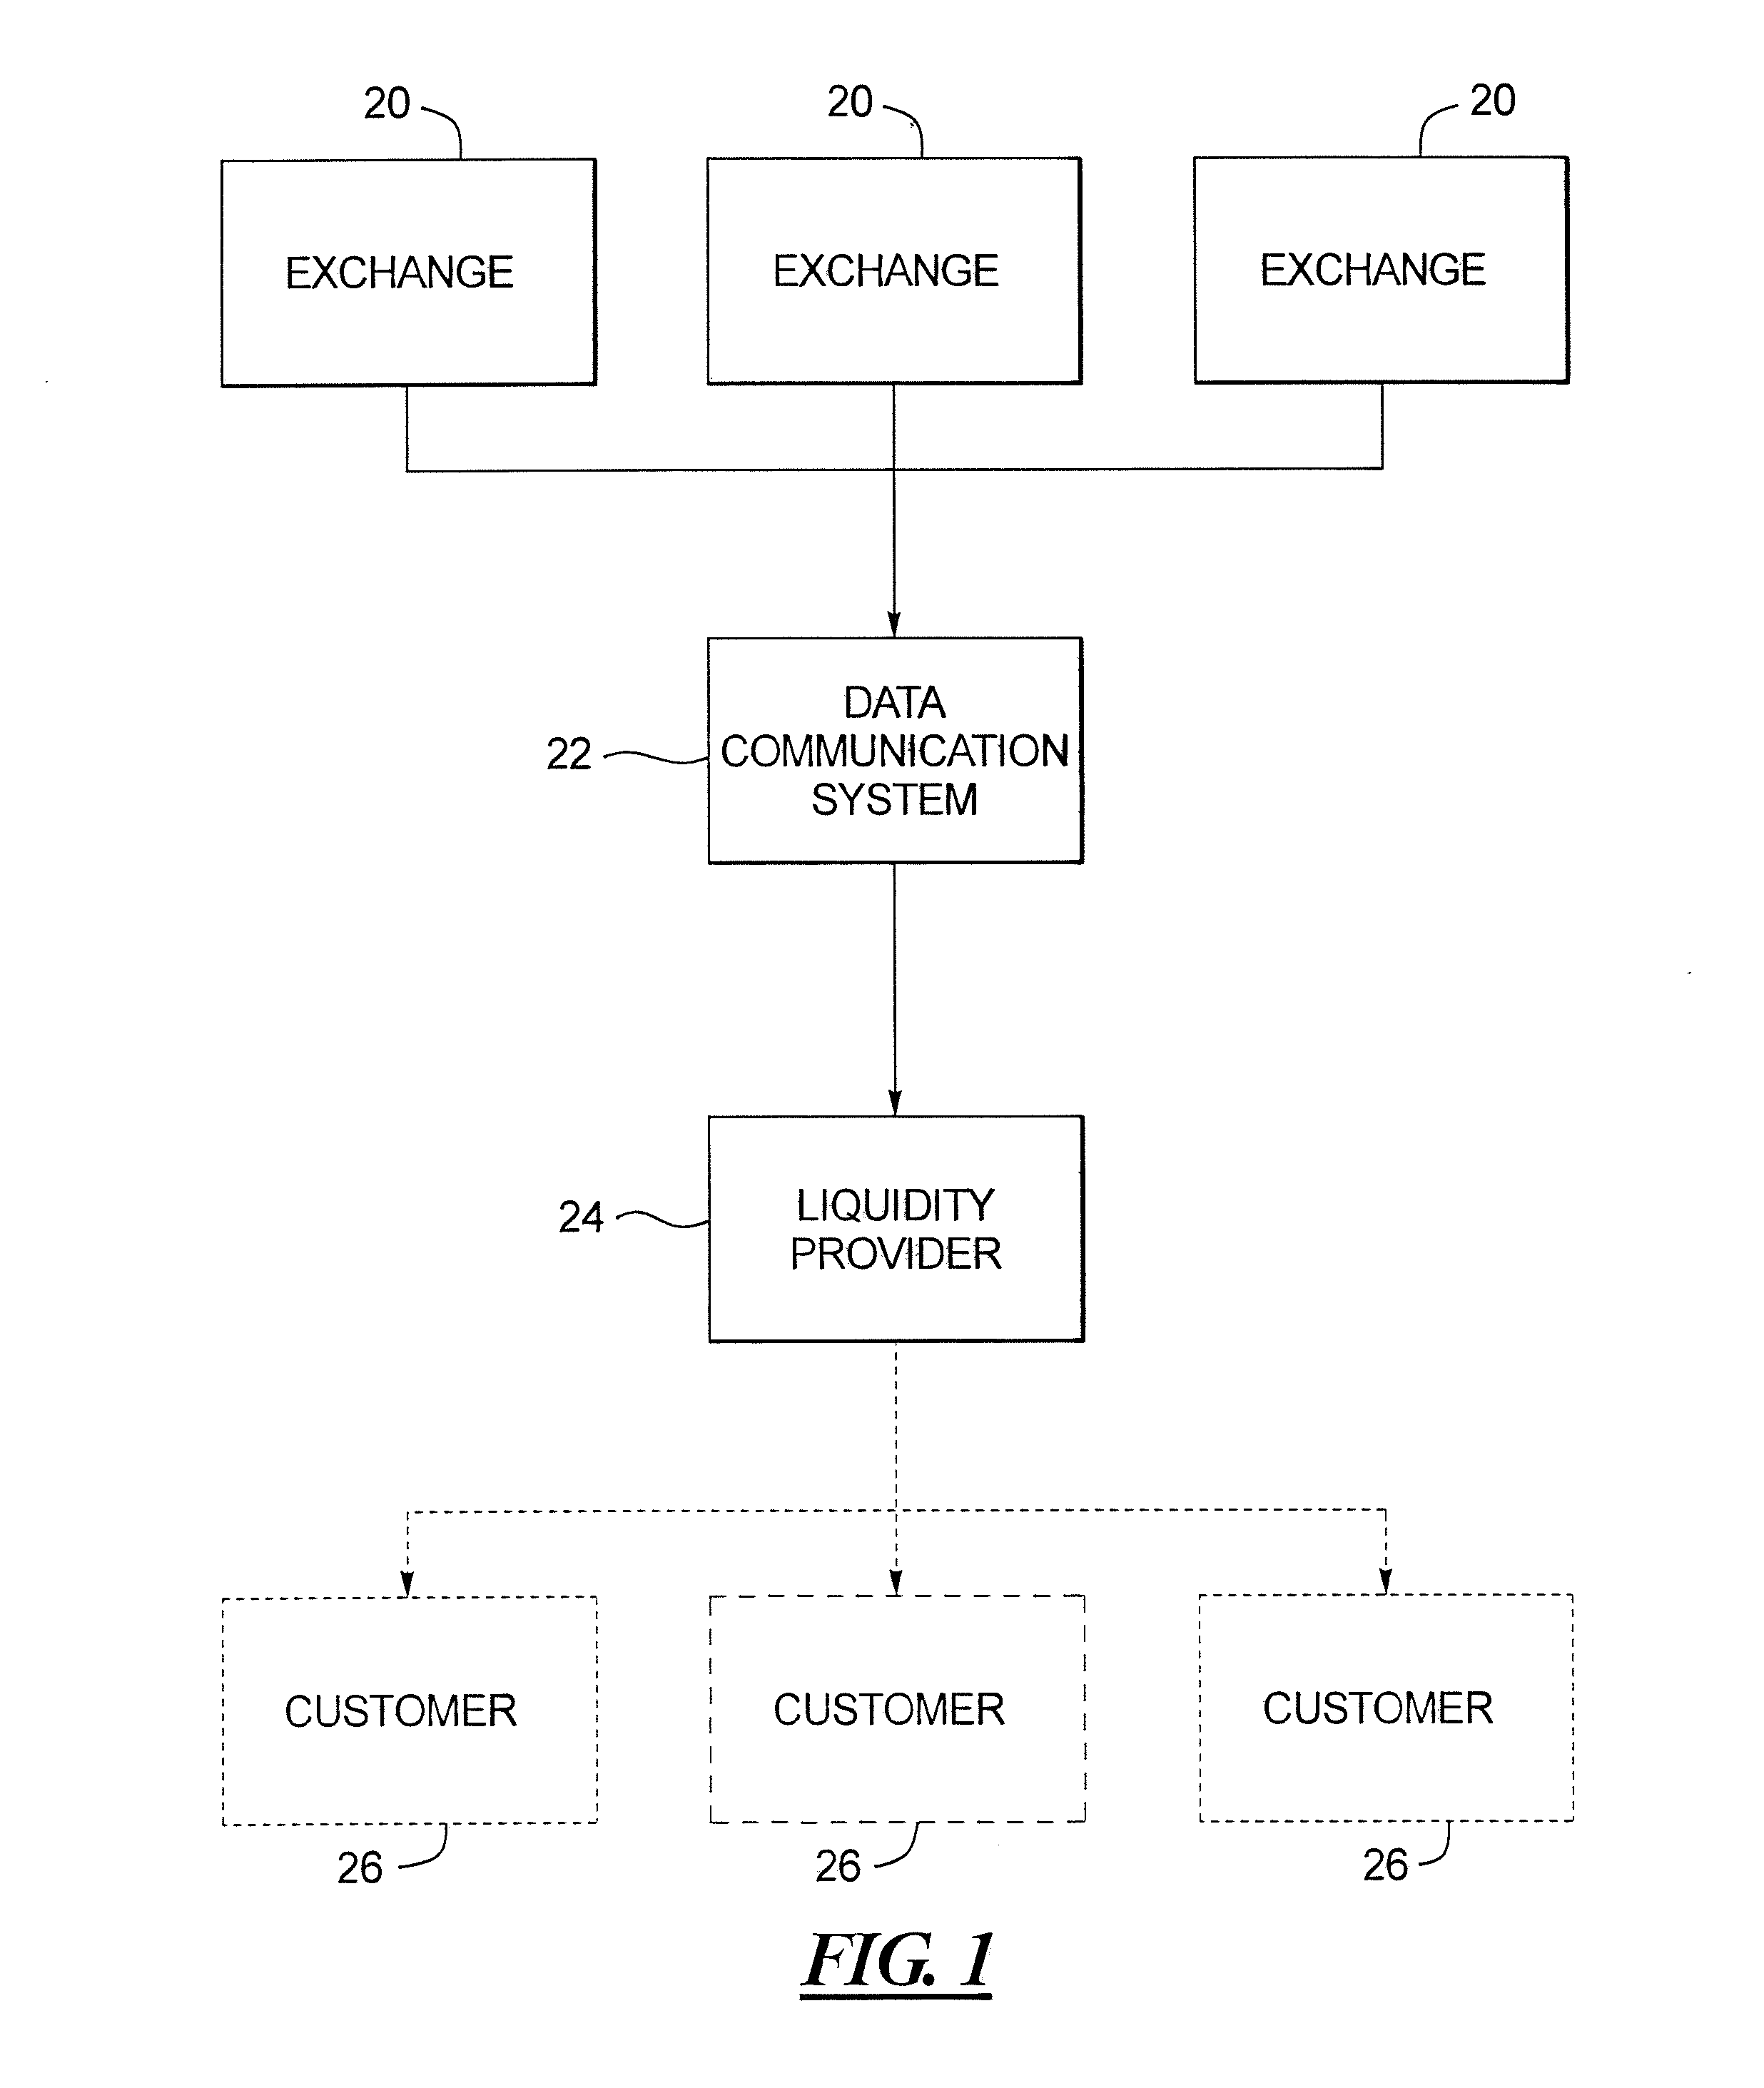 Method and apparatus for display of data with respect to certain tradable interests